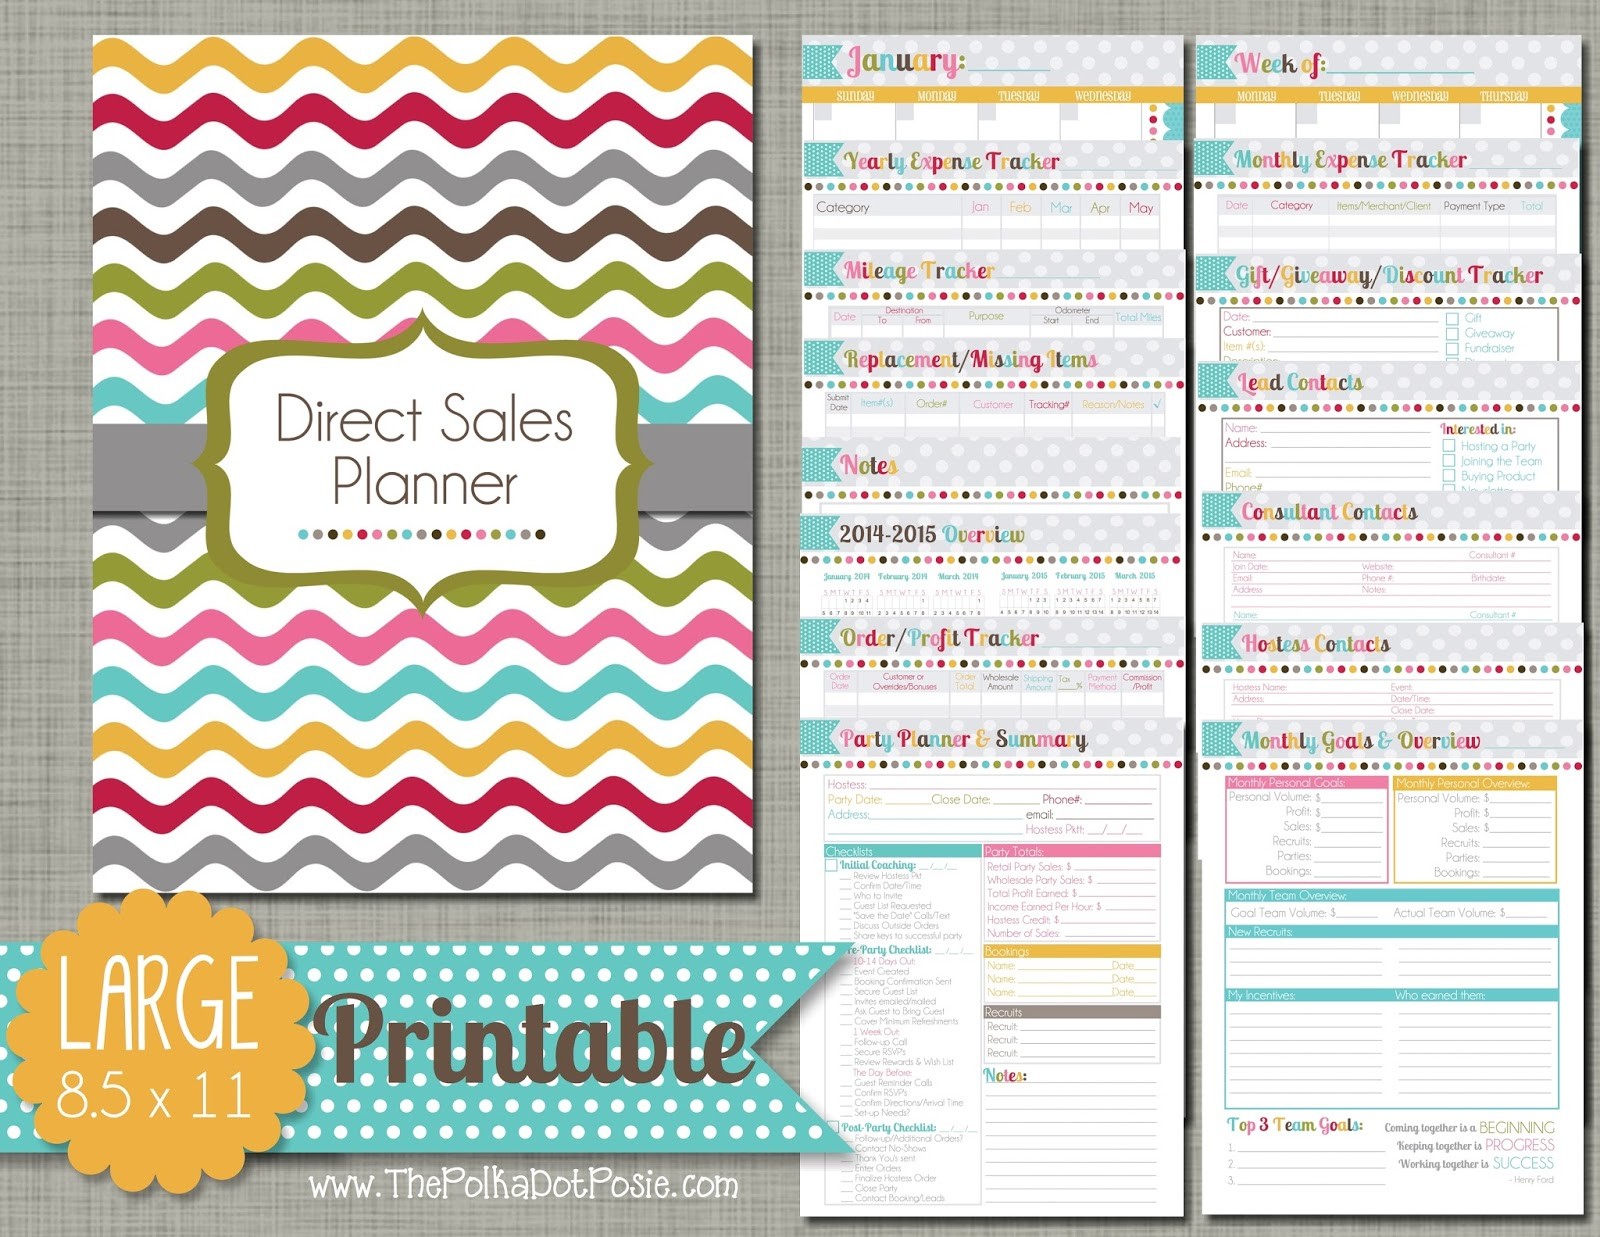 The Polka Dot Posie Direct Sales Planner Instructions For Printing Document Tracking